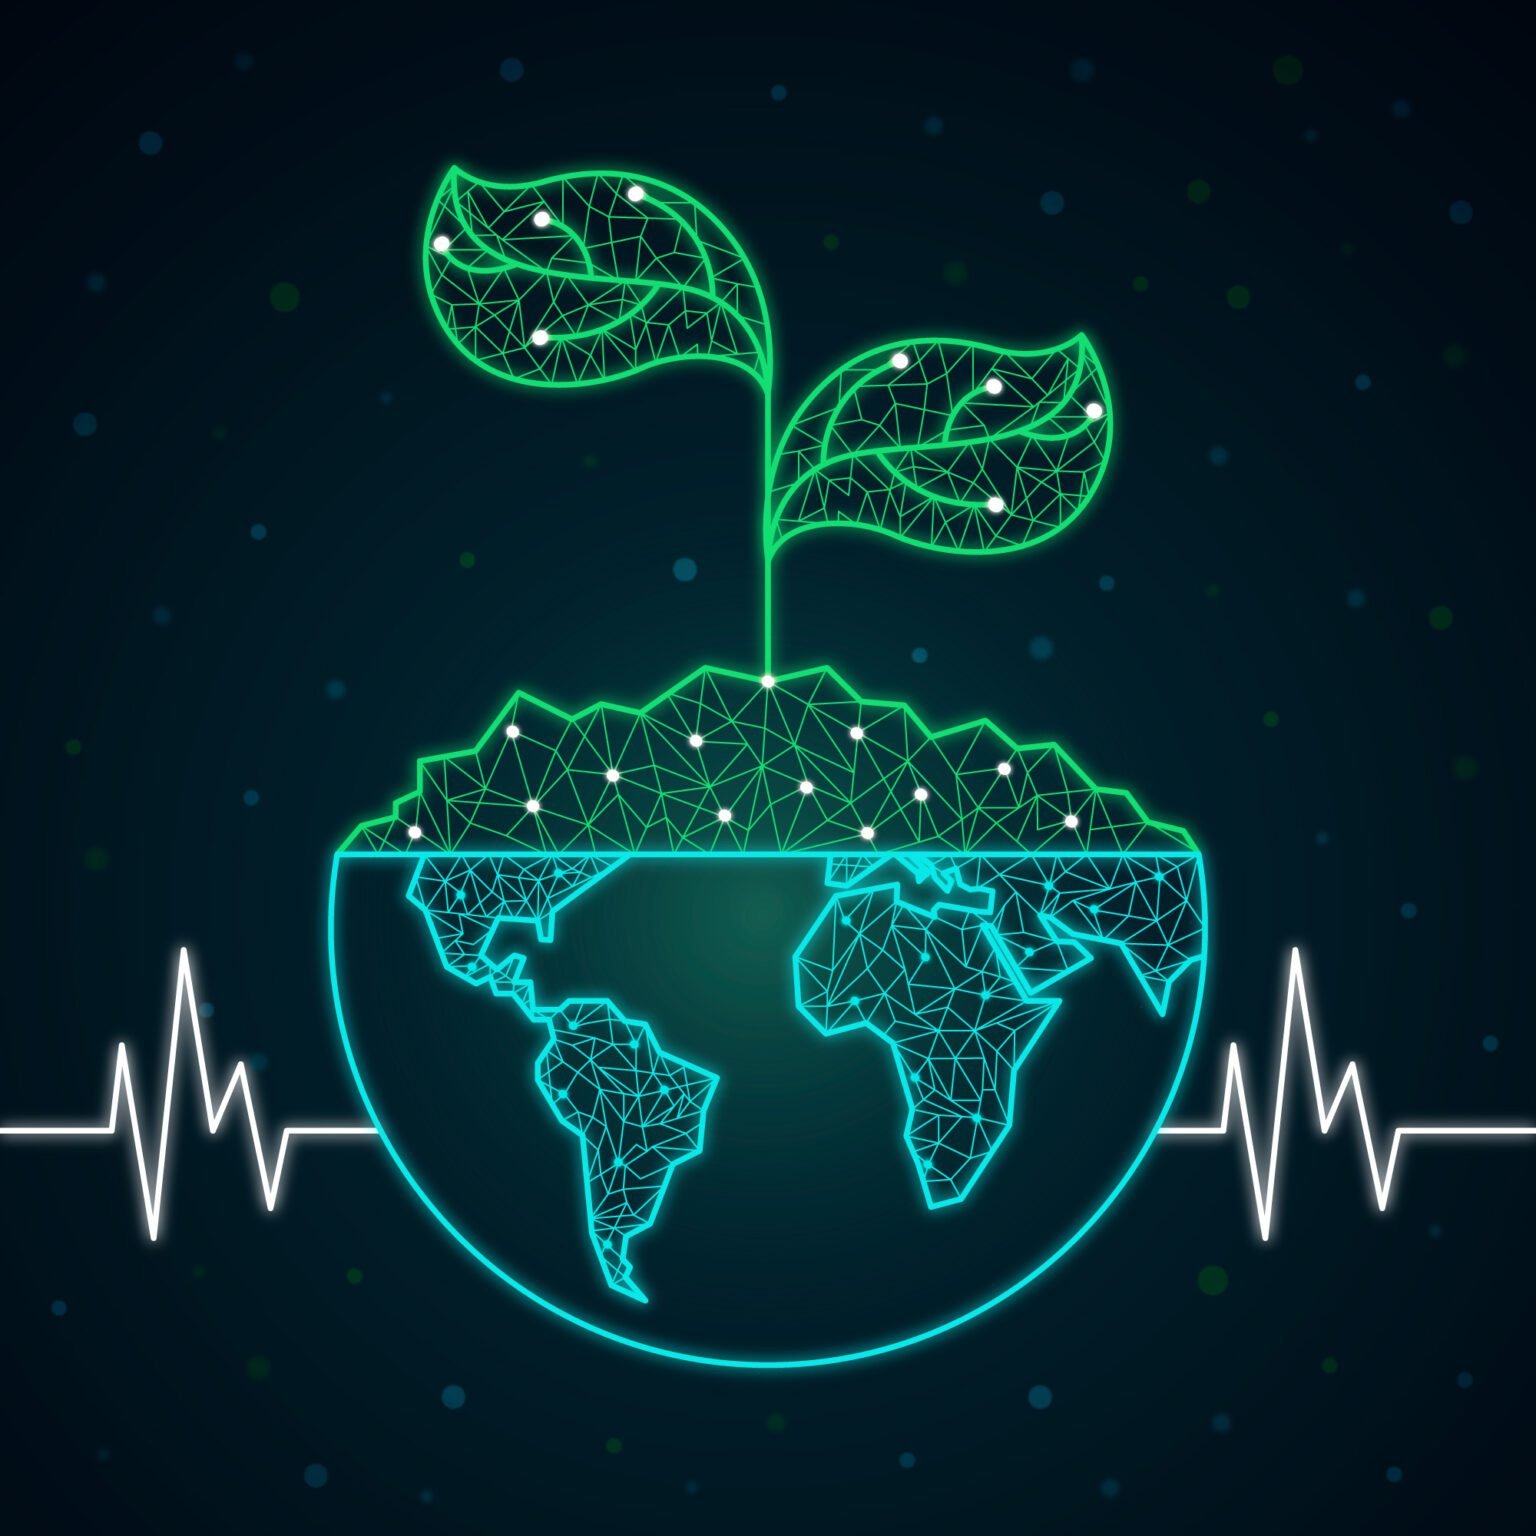 About us - Plant World - Discover artificial intelligence and agriculture